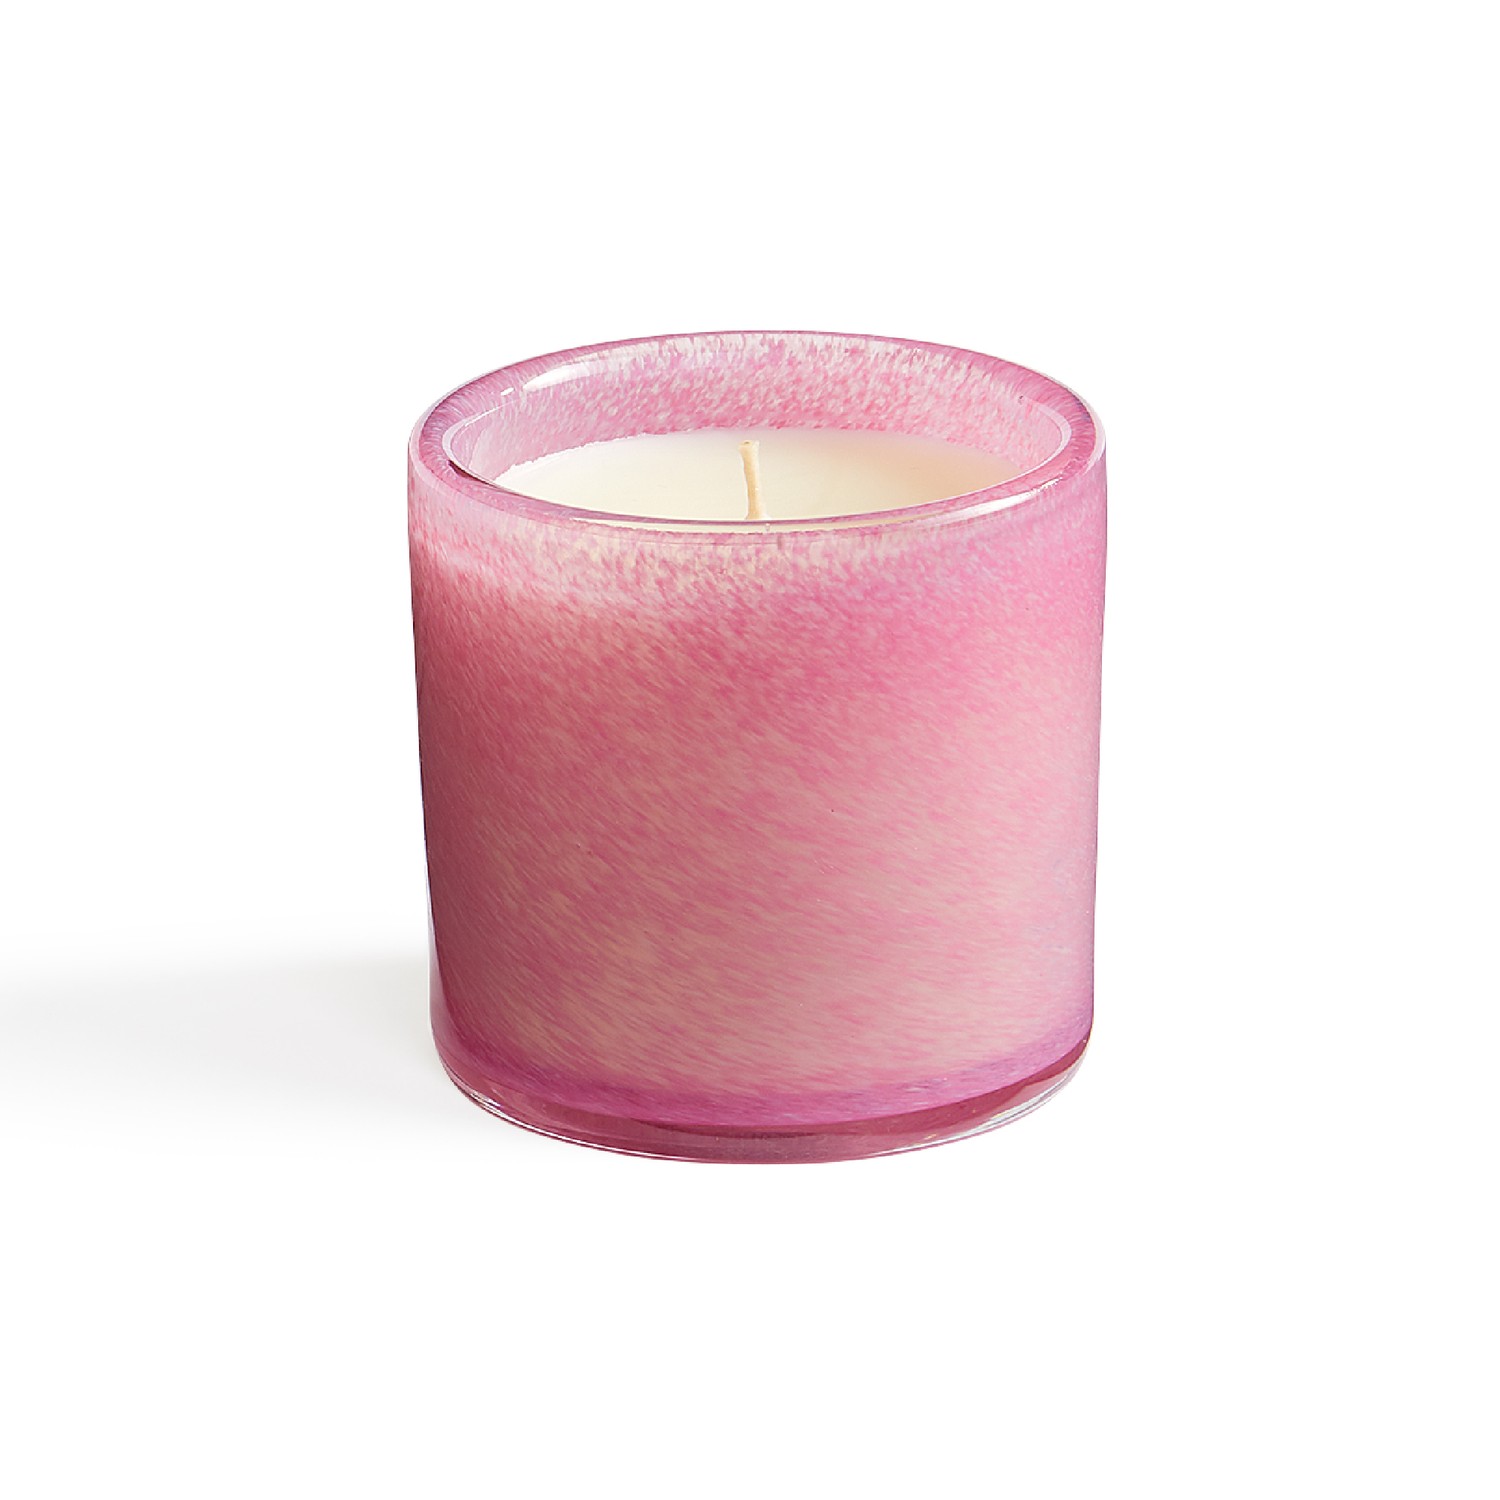 Five - Chanel No.5 Perfume Inspired Wood Wick Soy Candle